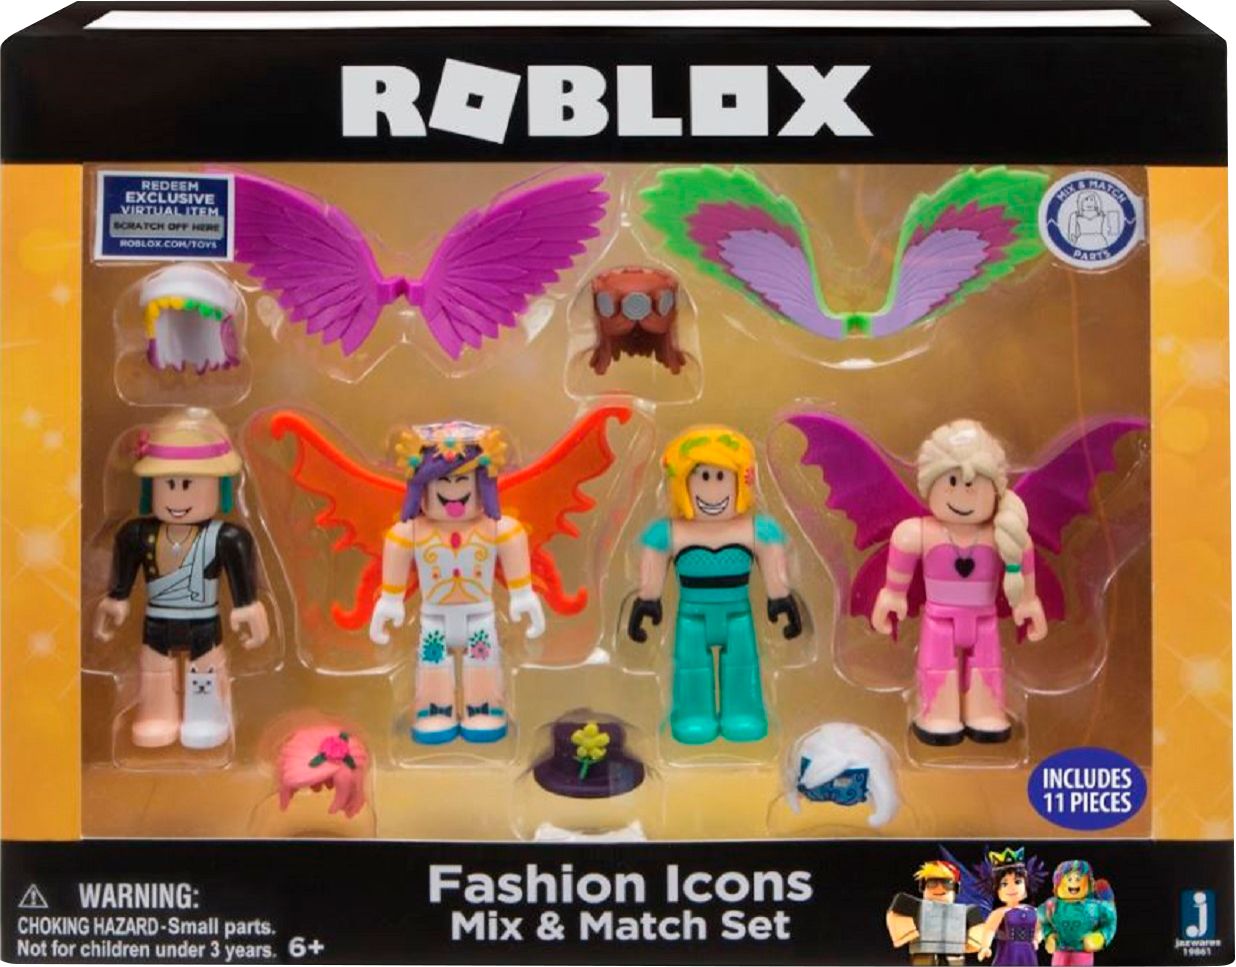 Roblox Celebrity Mix Match Set Styles May Vary 19860 Best Buy - 